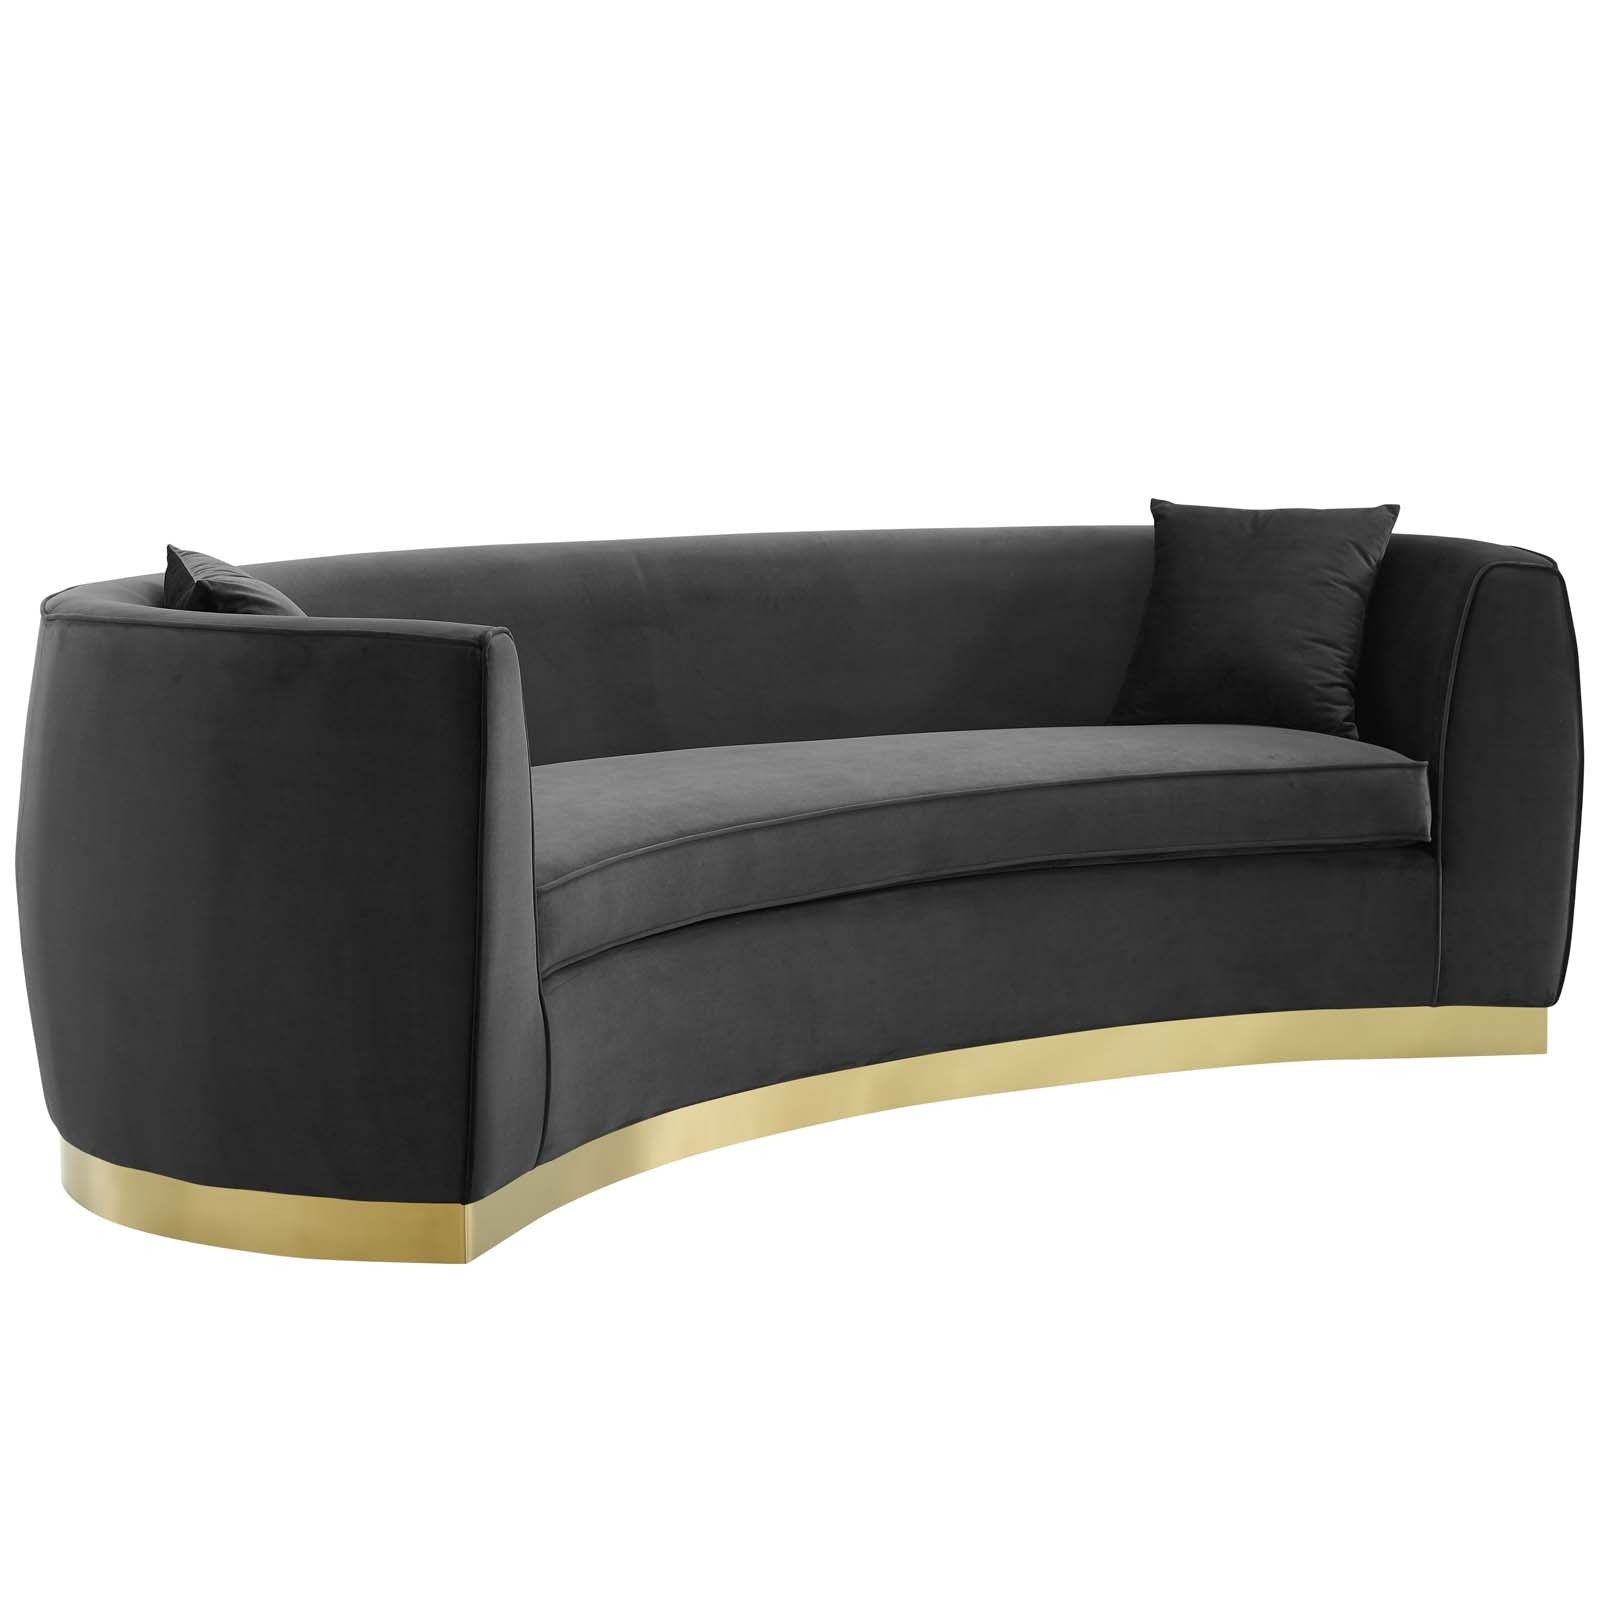 Modterior :: Living Room :: Sofas/couches :: Resolute With 4pc French Seamed Sectional Sofas Velvet Black (View 14 of 15)